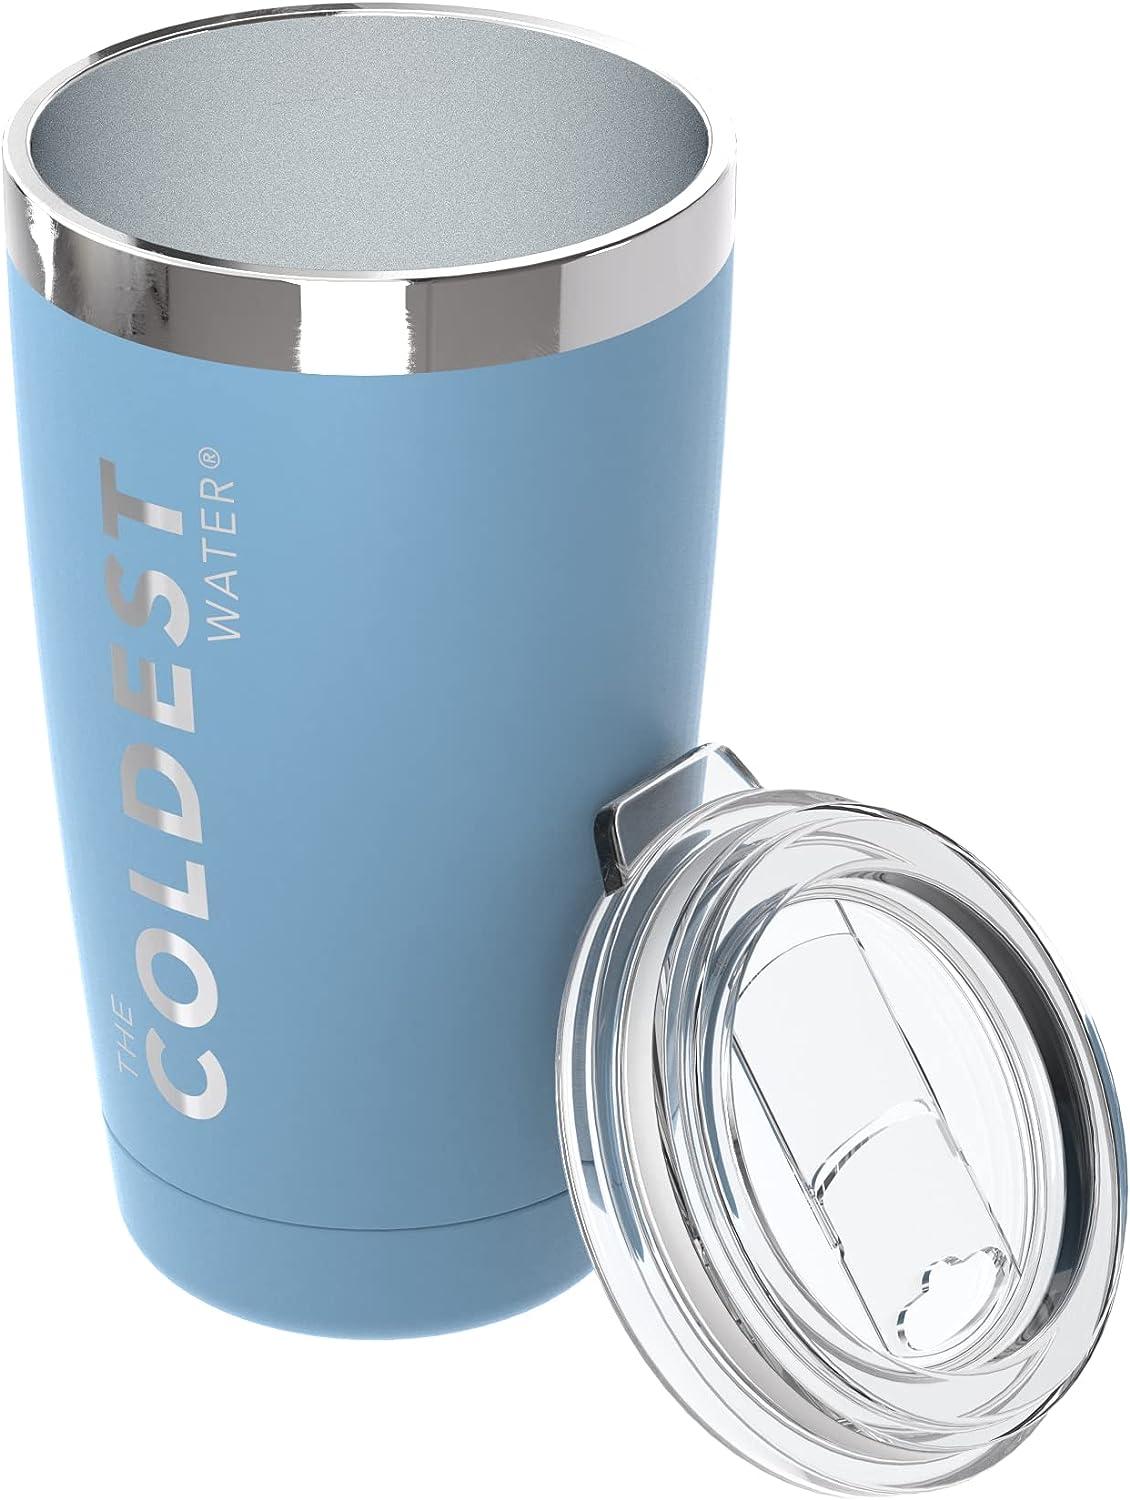 Insulated Coffee Mug With Lid Stainless Steel Cup Premium Thermal Travel  Blue